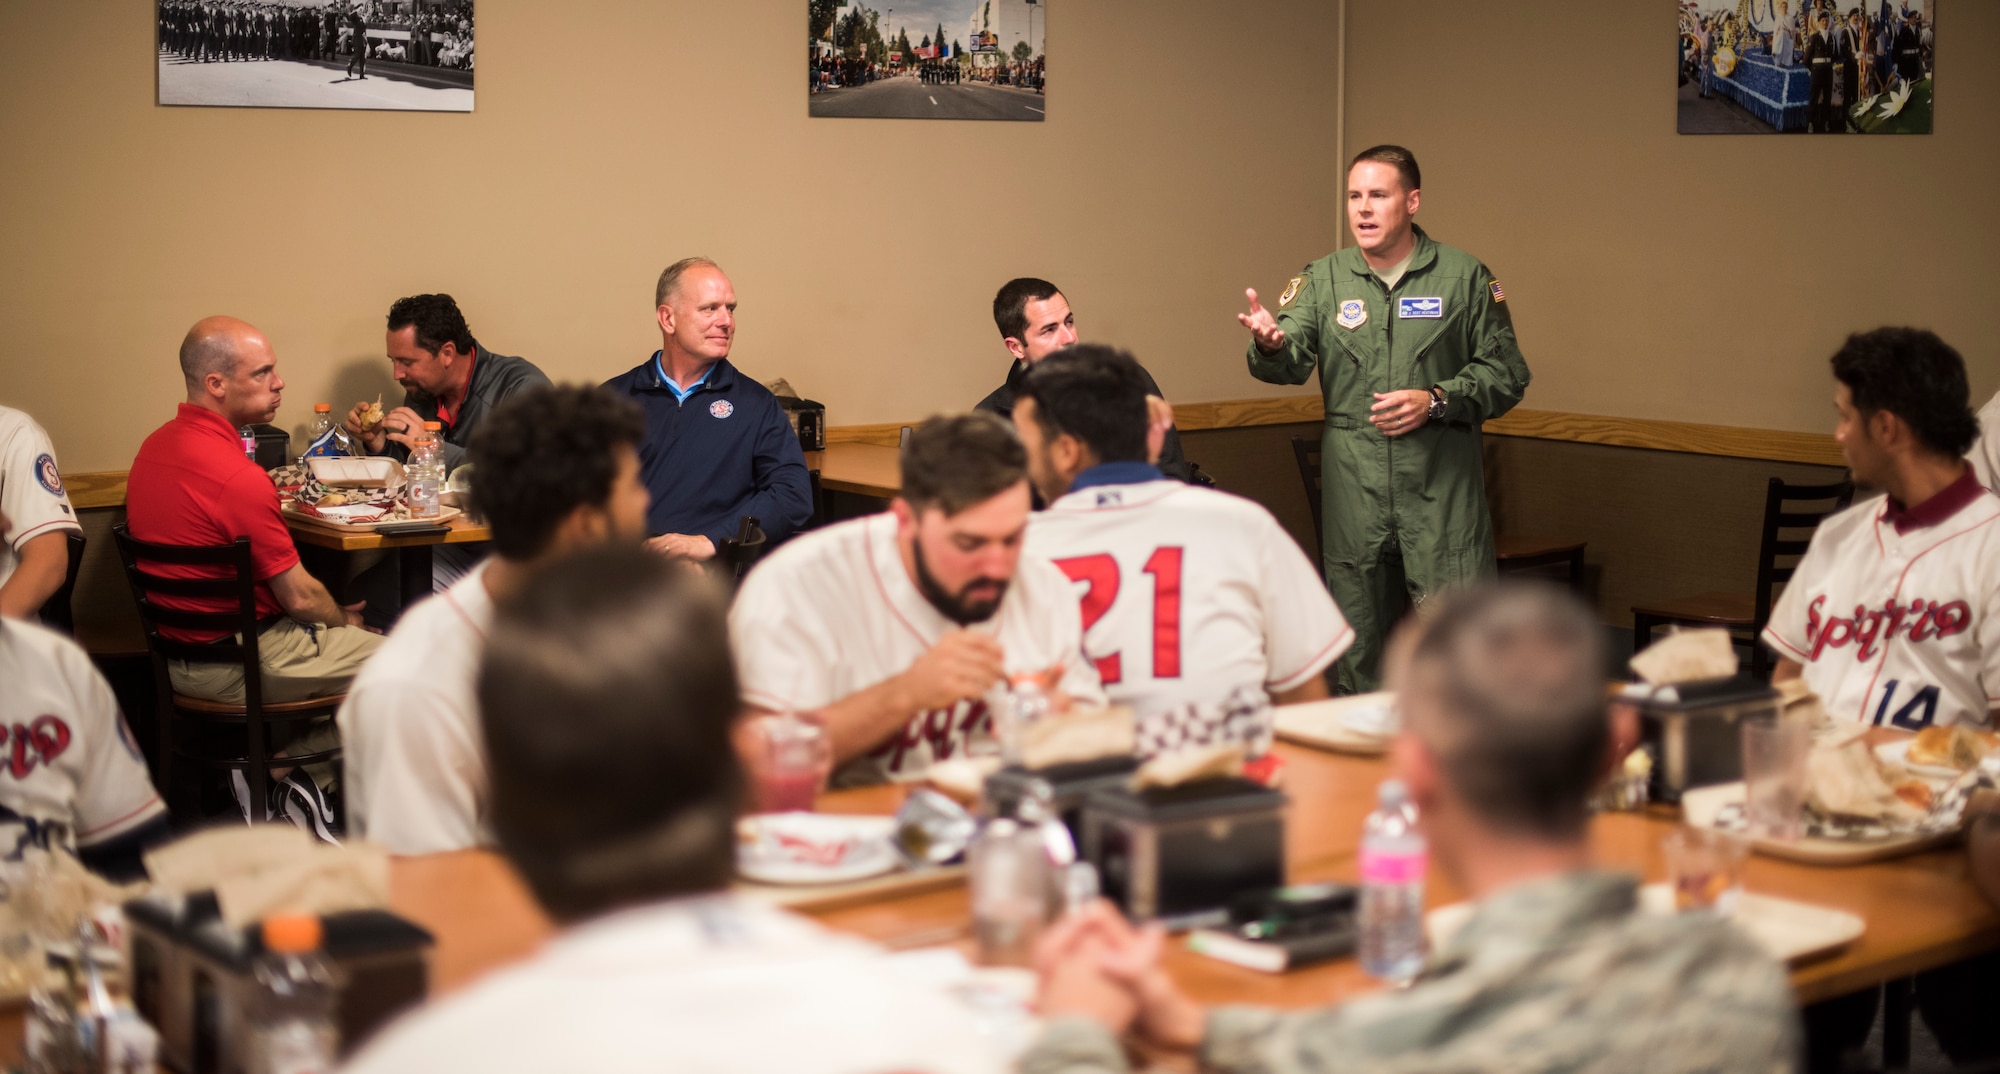 Col. Scot Heathman, 92nd Air Refueling Wing commander, talks with the Spokane Indians Baseball team about Team Fairchild and the military as a whole during their visit at Fairchild Air Force Base, Wash. June 12, 2018. Among lessons learned in communication and teamwork, the Indians learned how many young men and women who serve in today’s military are the same age as them; Airmen wear a uniform but play in a different arena. (U.S. Air Force photo/Senior Airman Sean Campbell)